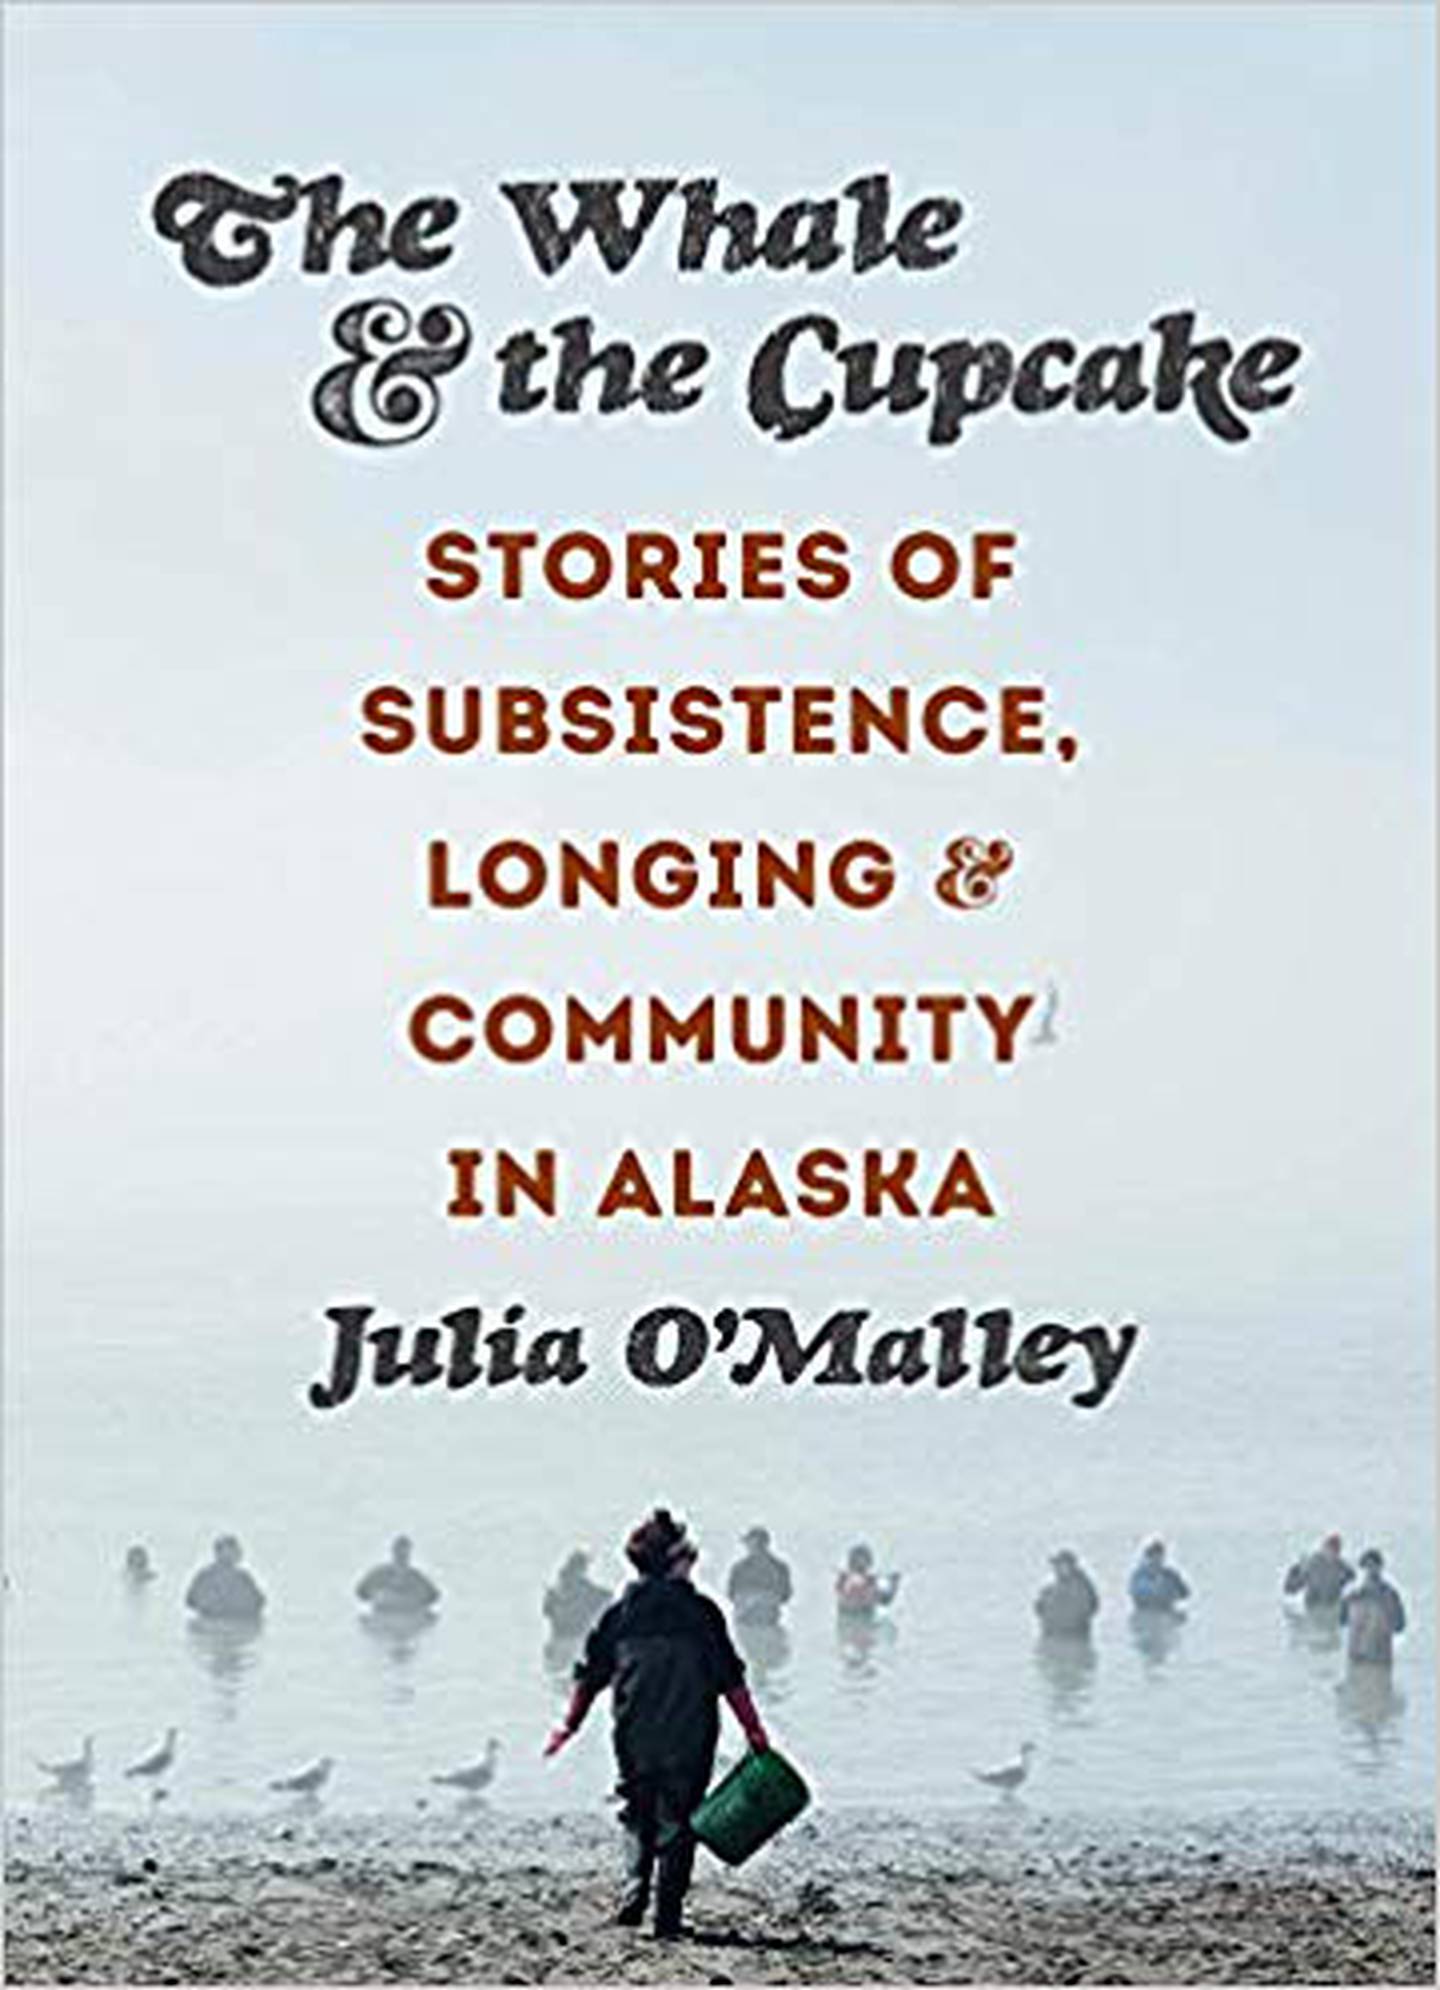 “The Whale and the Cupcake: Stories of Subsistence, Longing, and Community in Alaska,” by Julia O'Malley